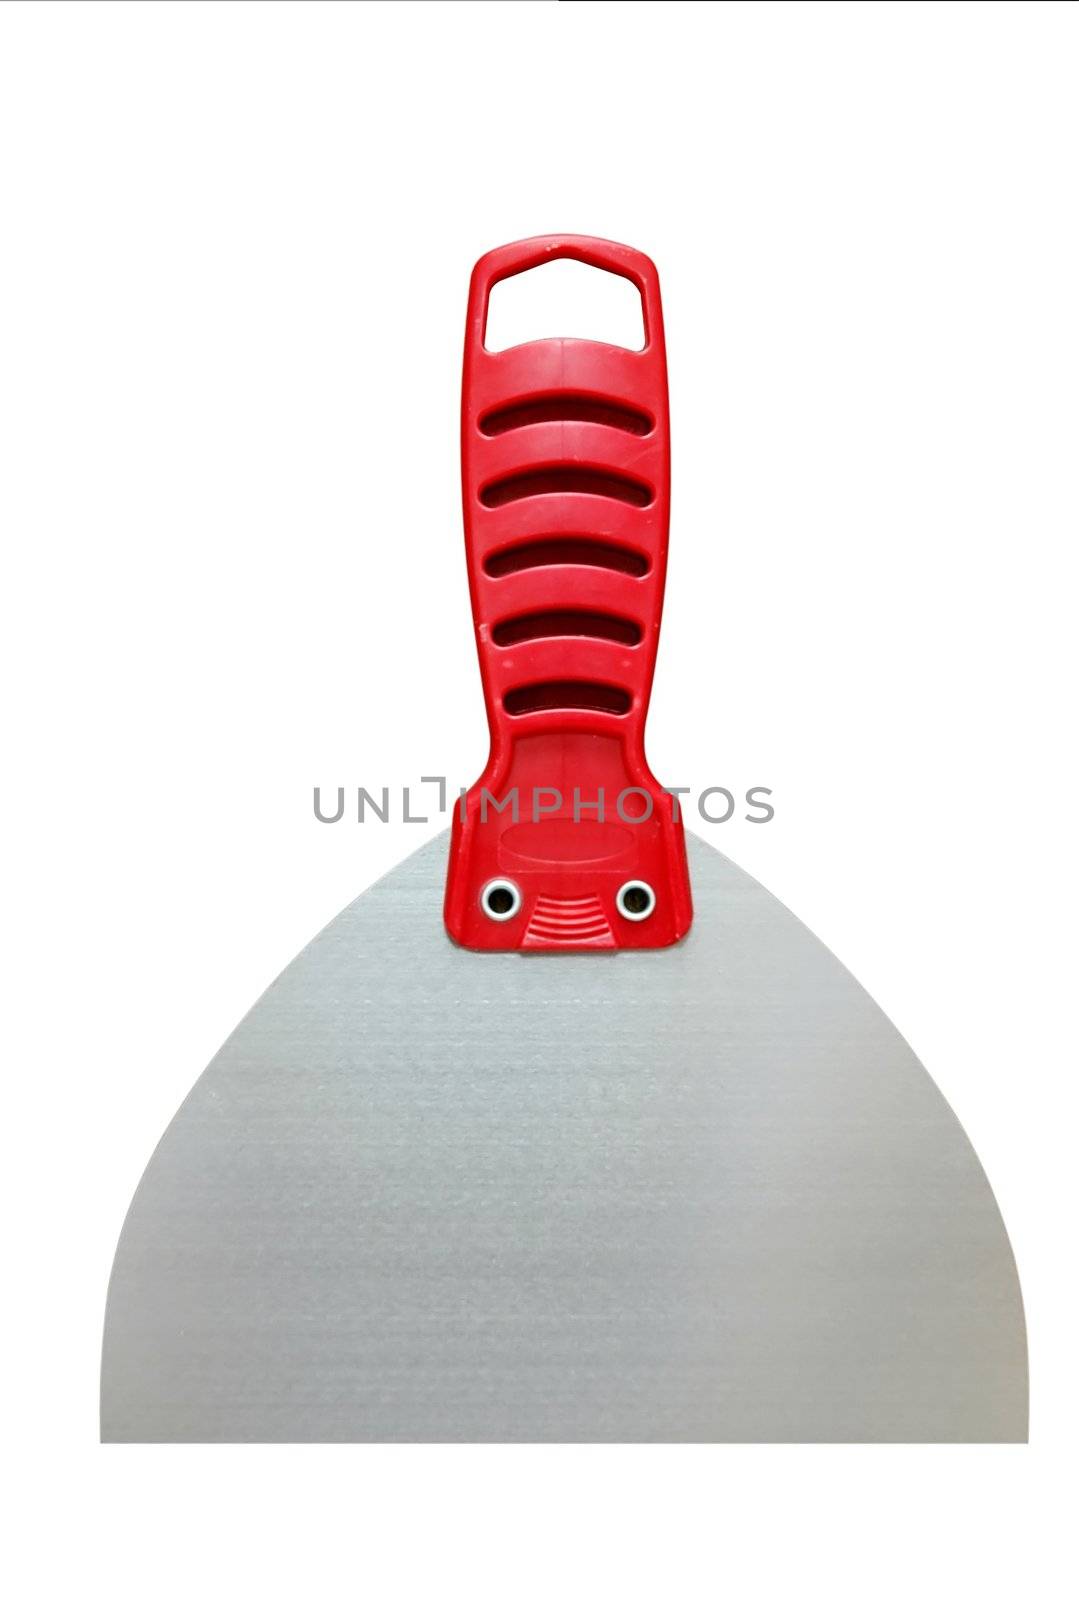 Putty knife with clipping path.